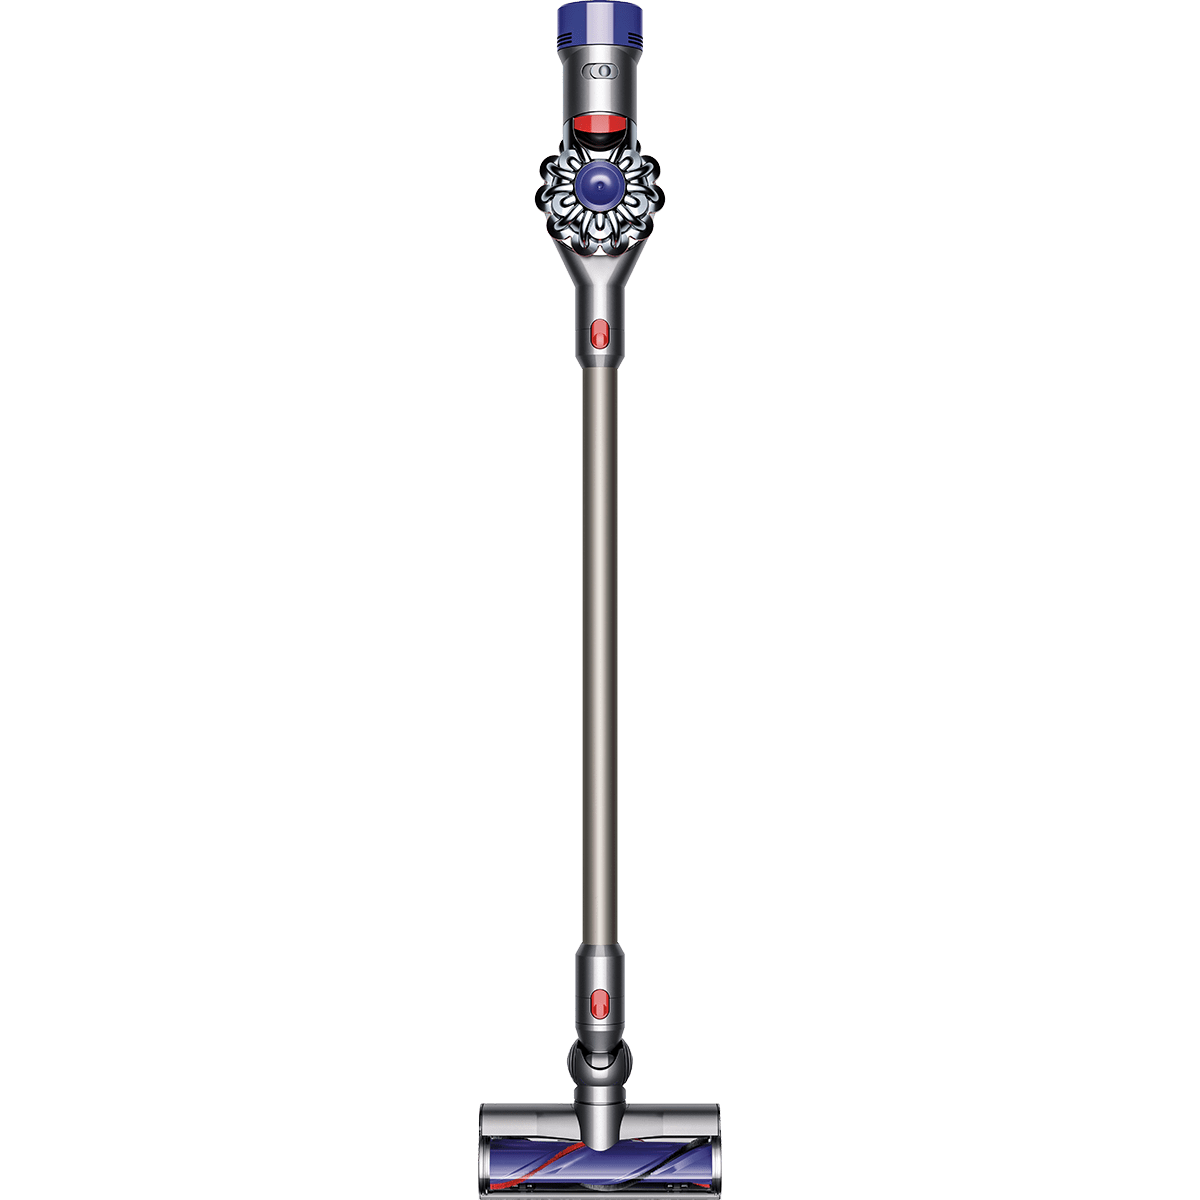 Dyson V8 Absolute Cordless HEPA Vacuum Cleaner (Sold By )